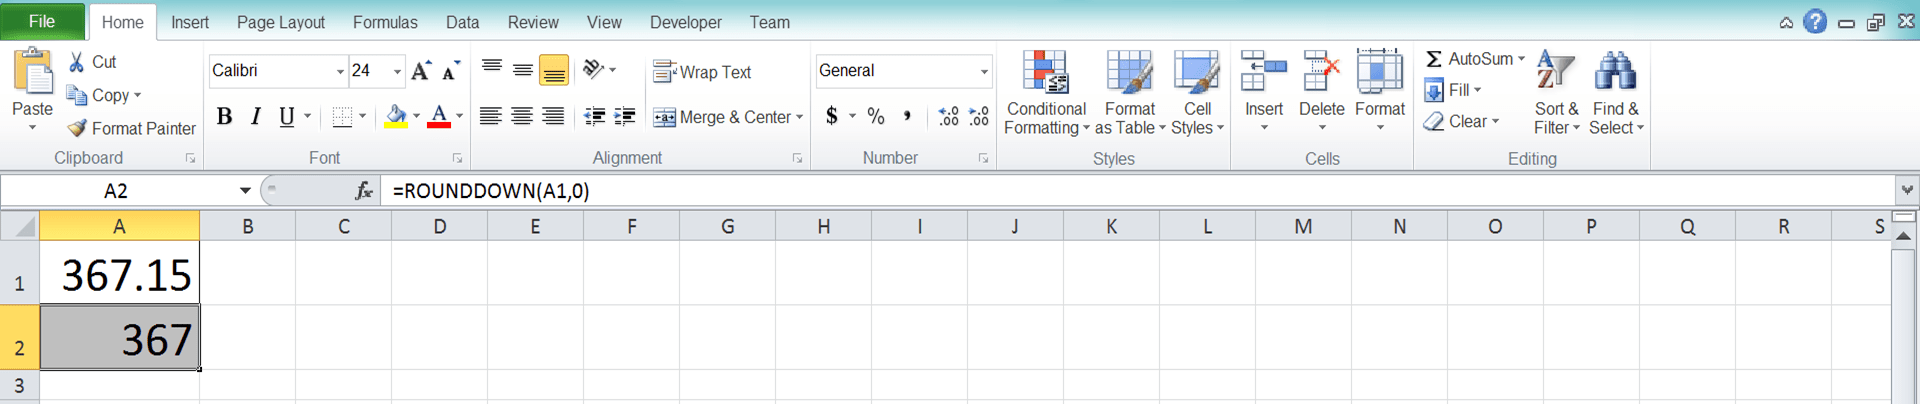 Excel ROUNDDOWN Formula: Functions, Examples, and How to Use - Screenshot of Step 7